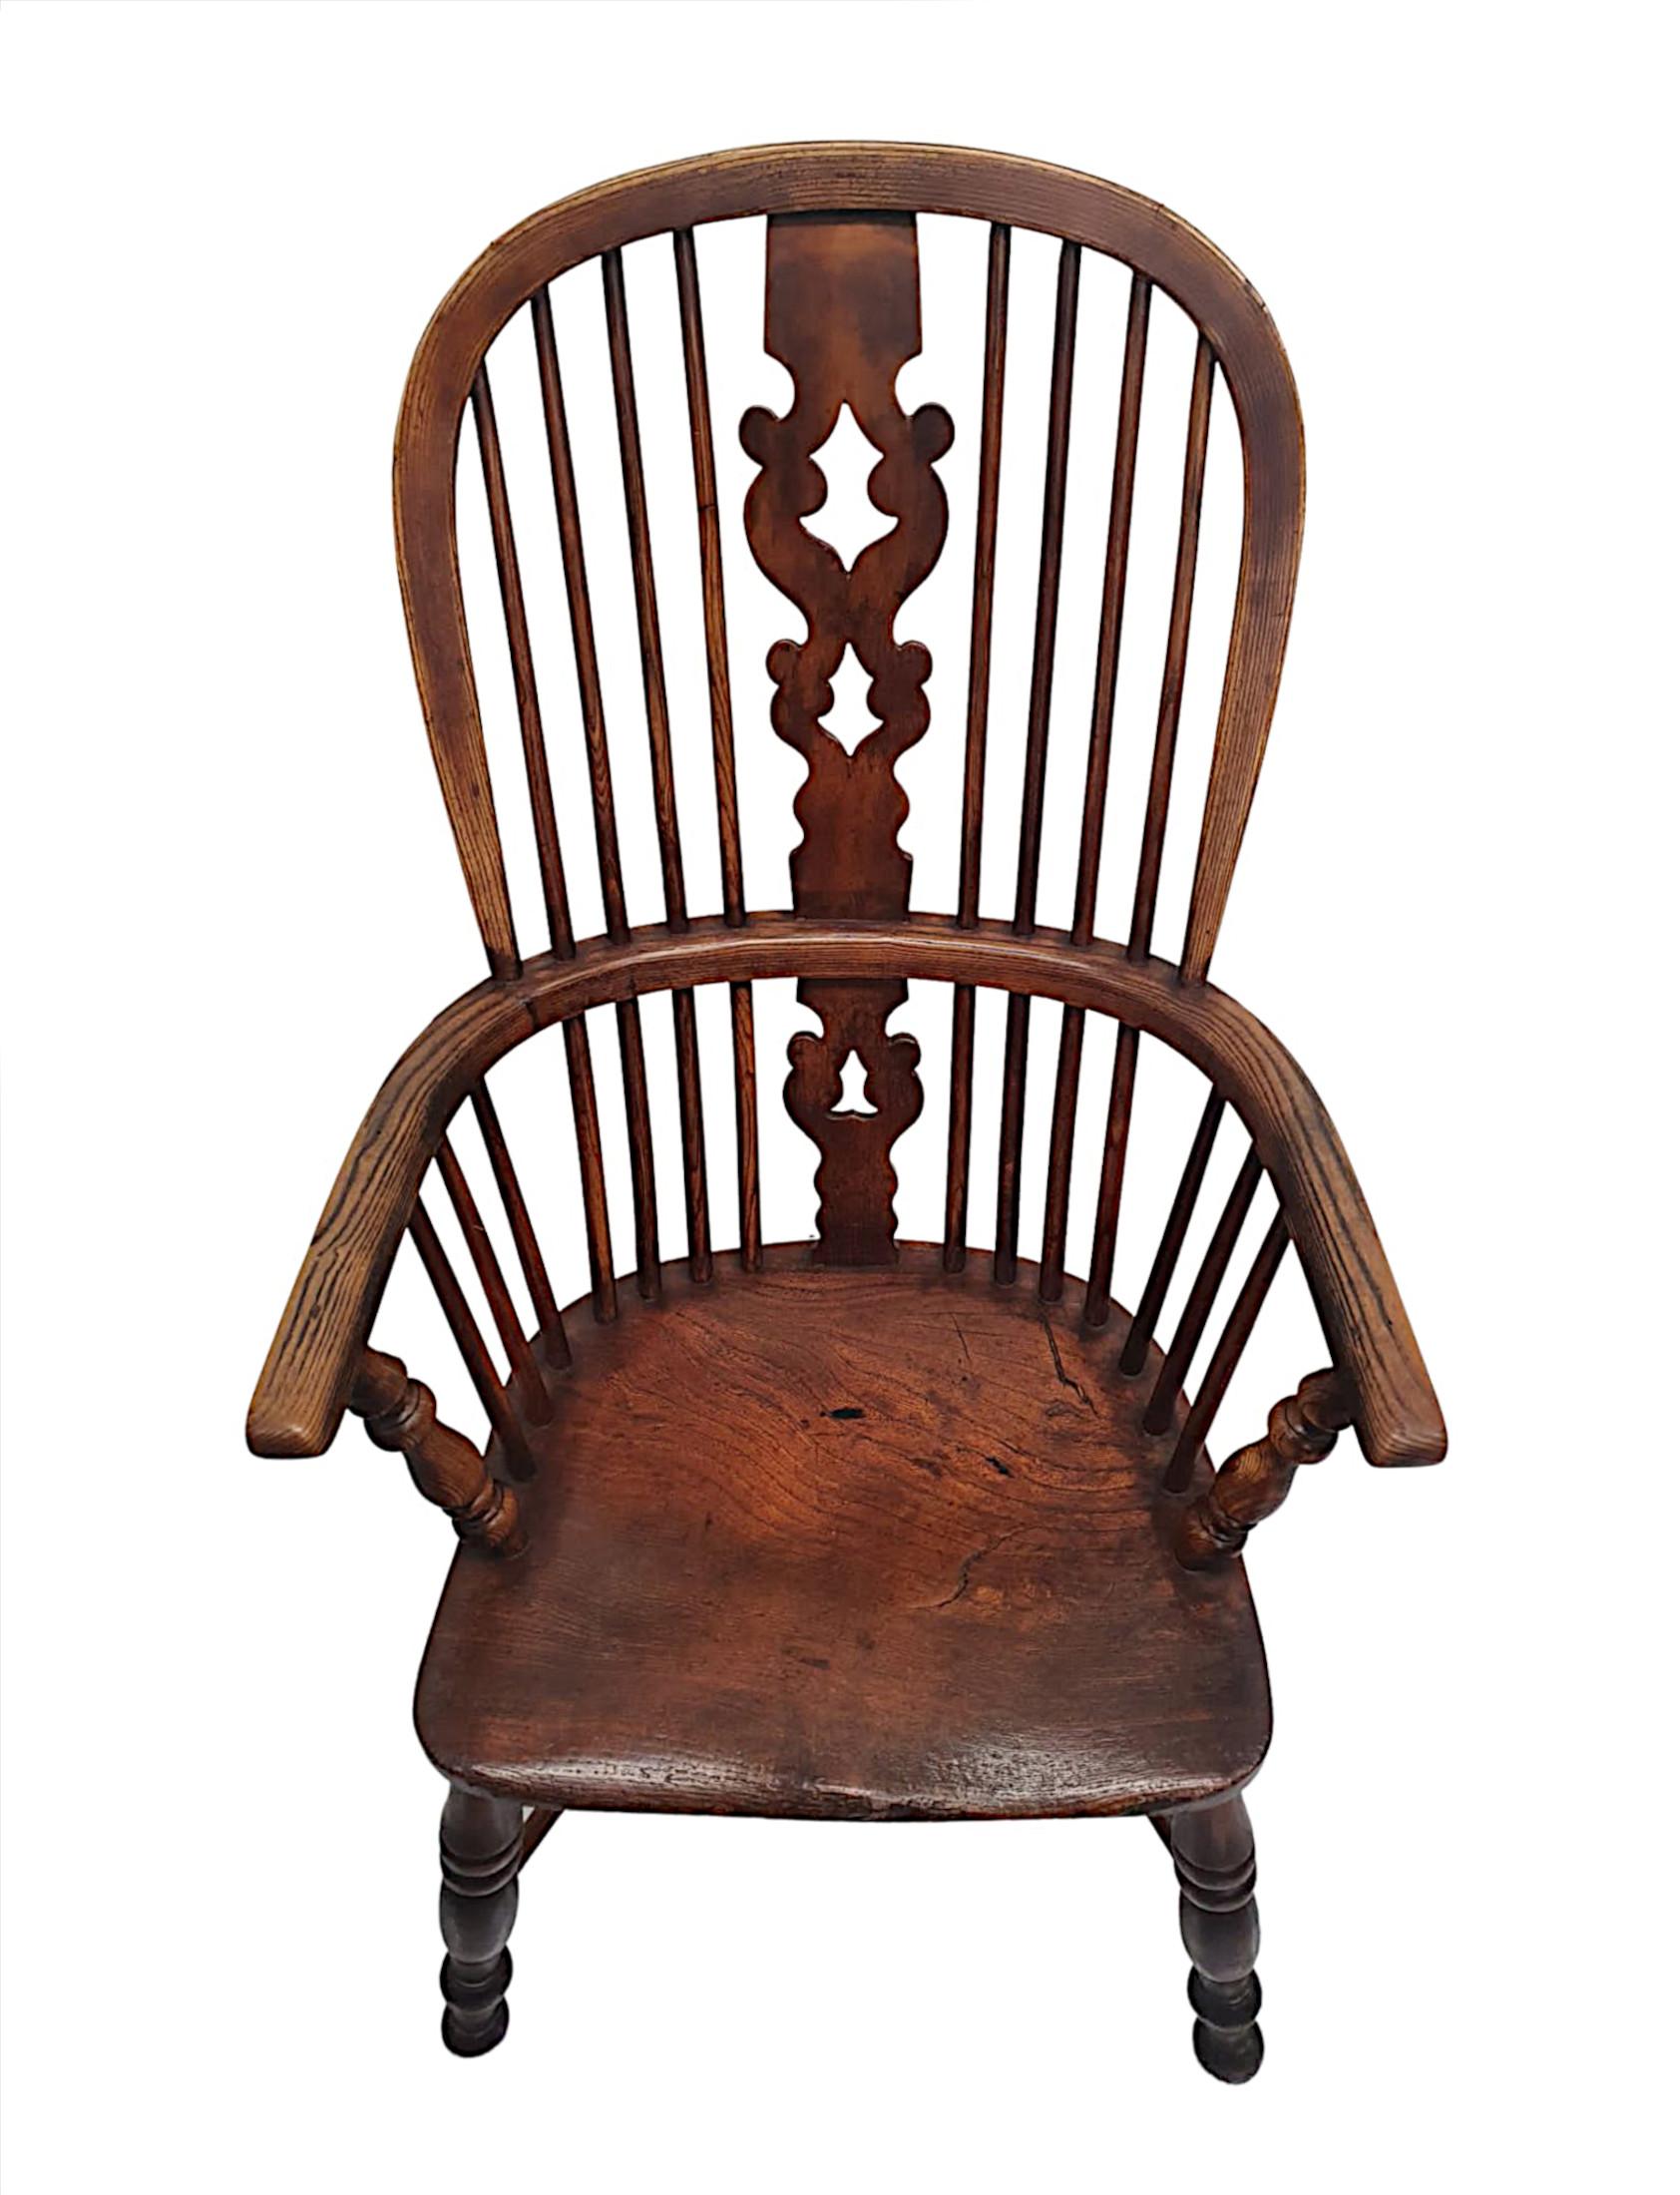 Very Rare and Fine 19th Century High Back Windsor Armchair In Good Condition For Sale In Dublin, IE